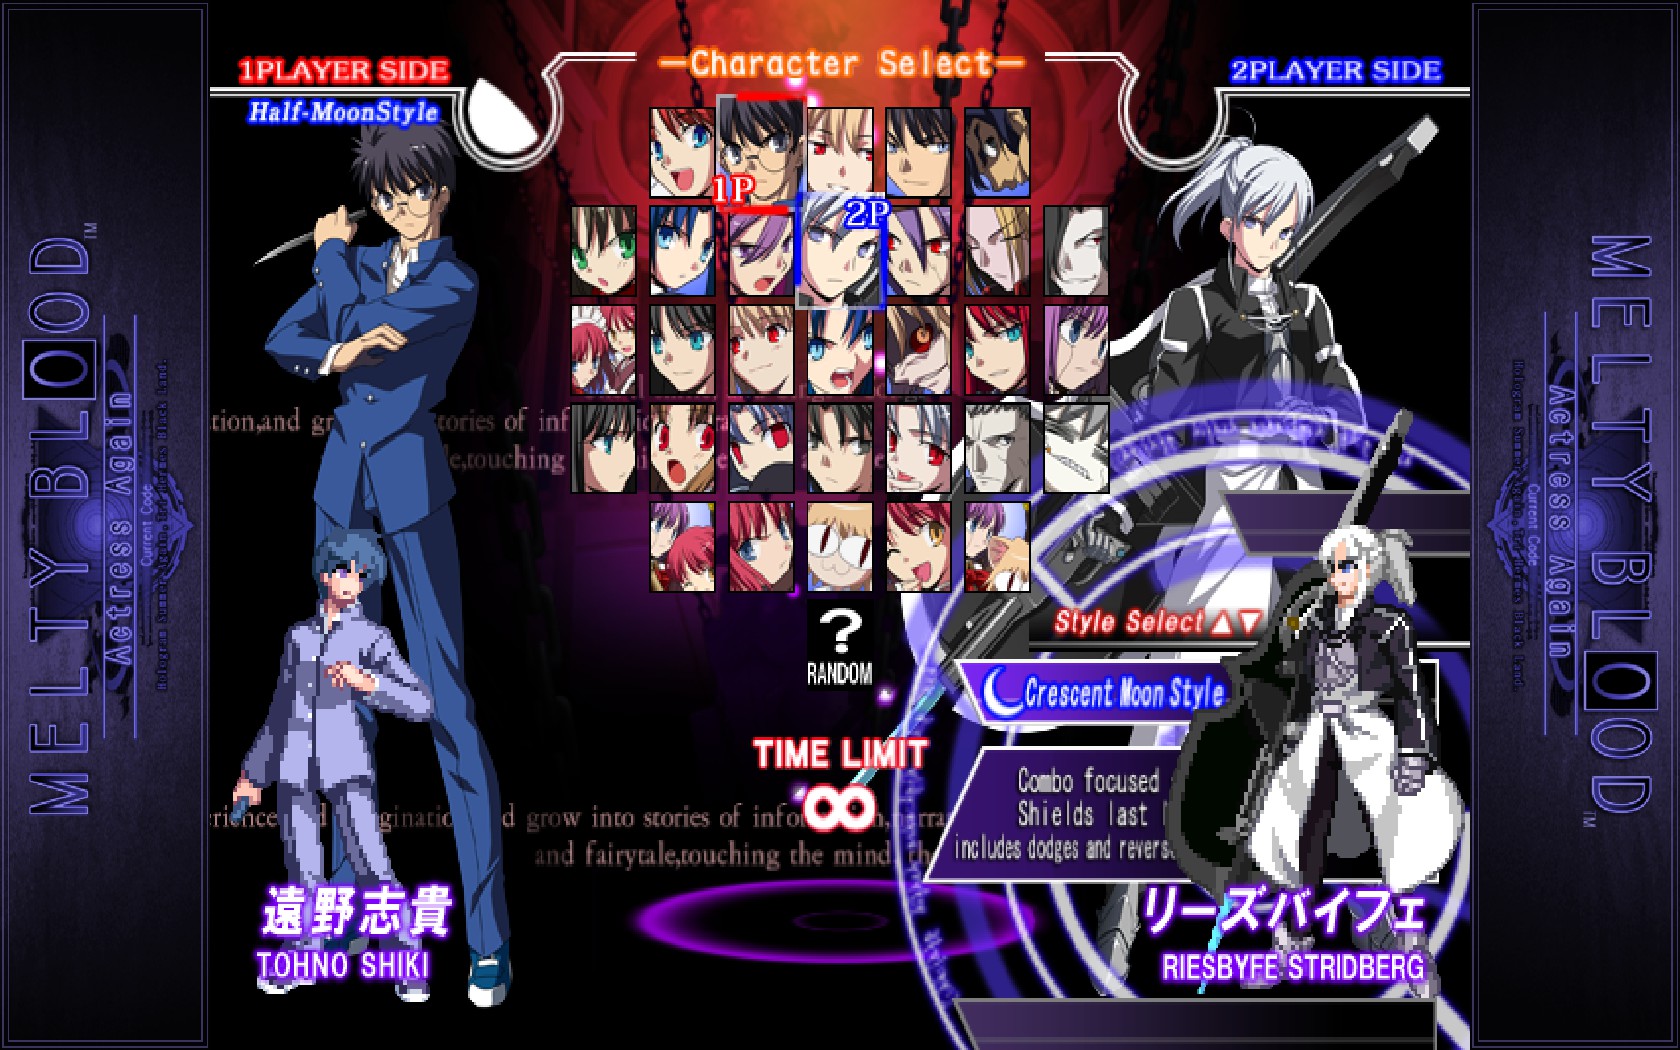 Melty Blood #4